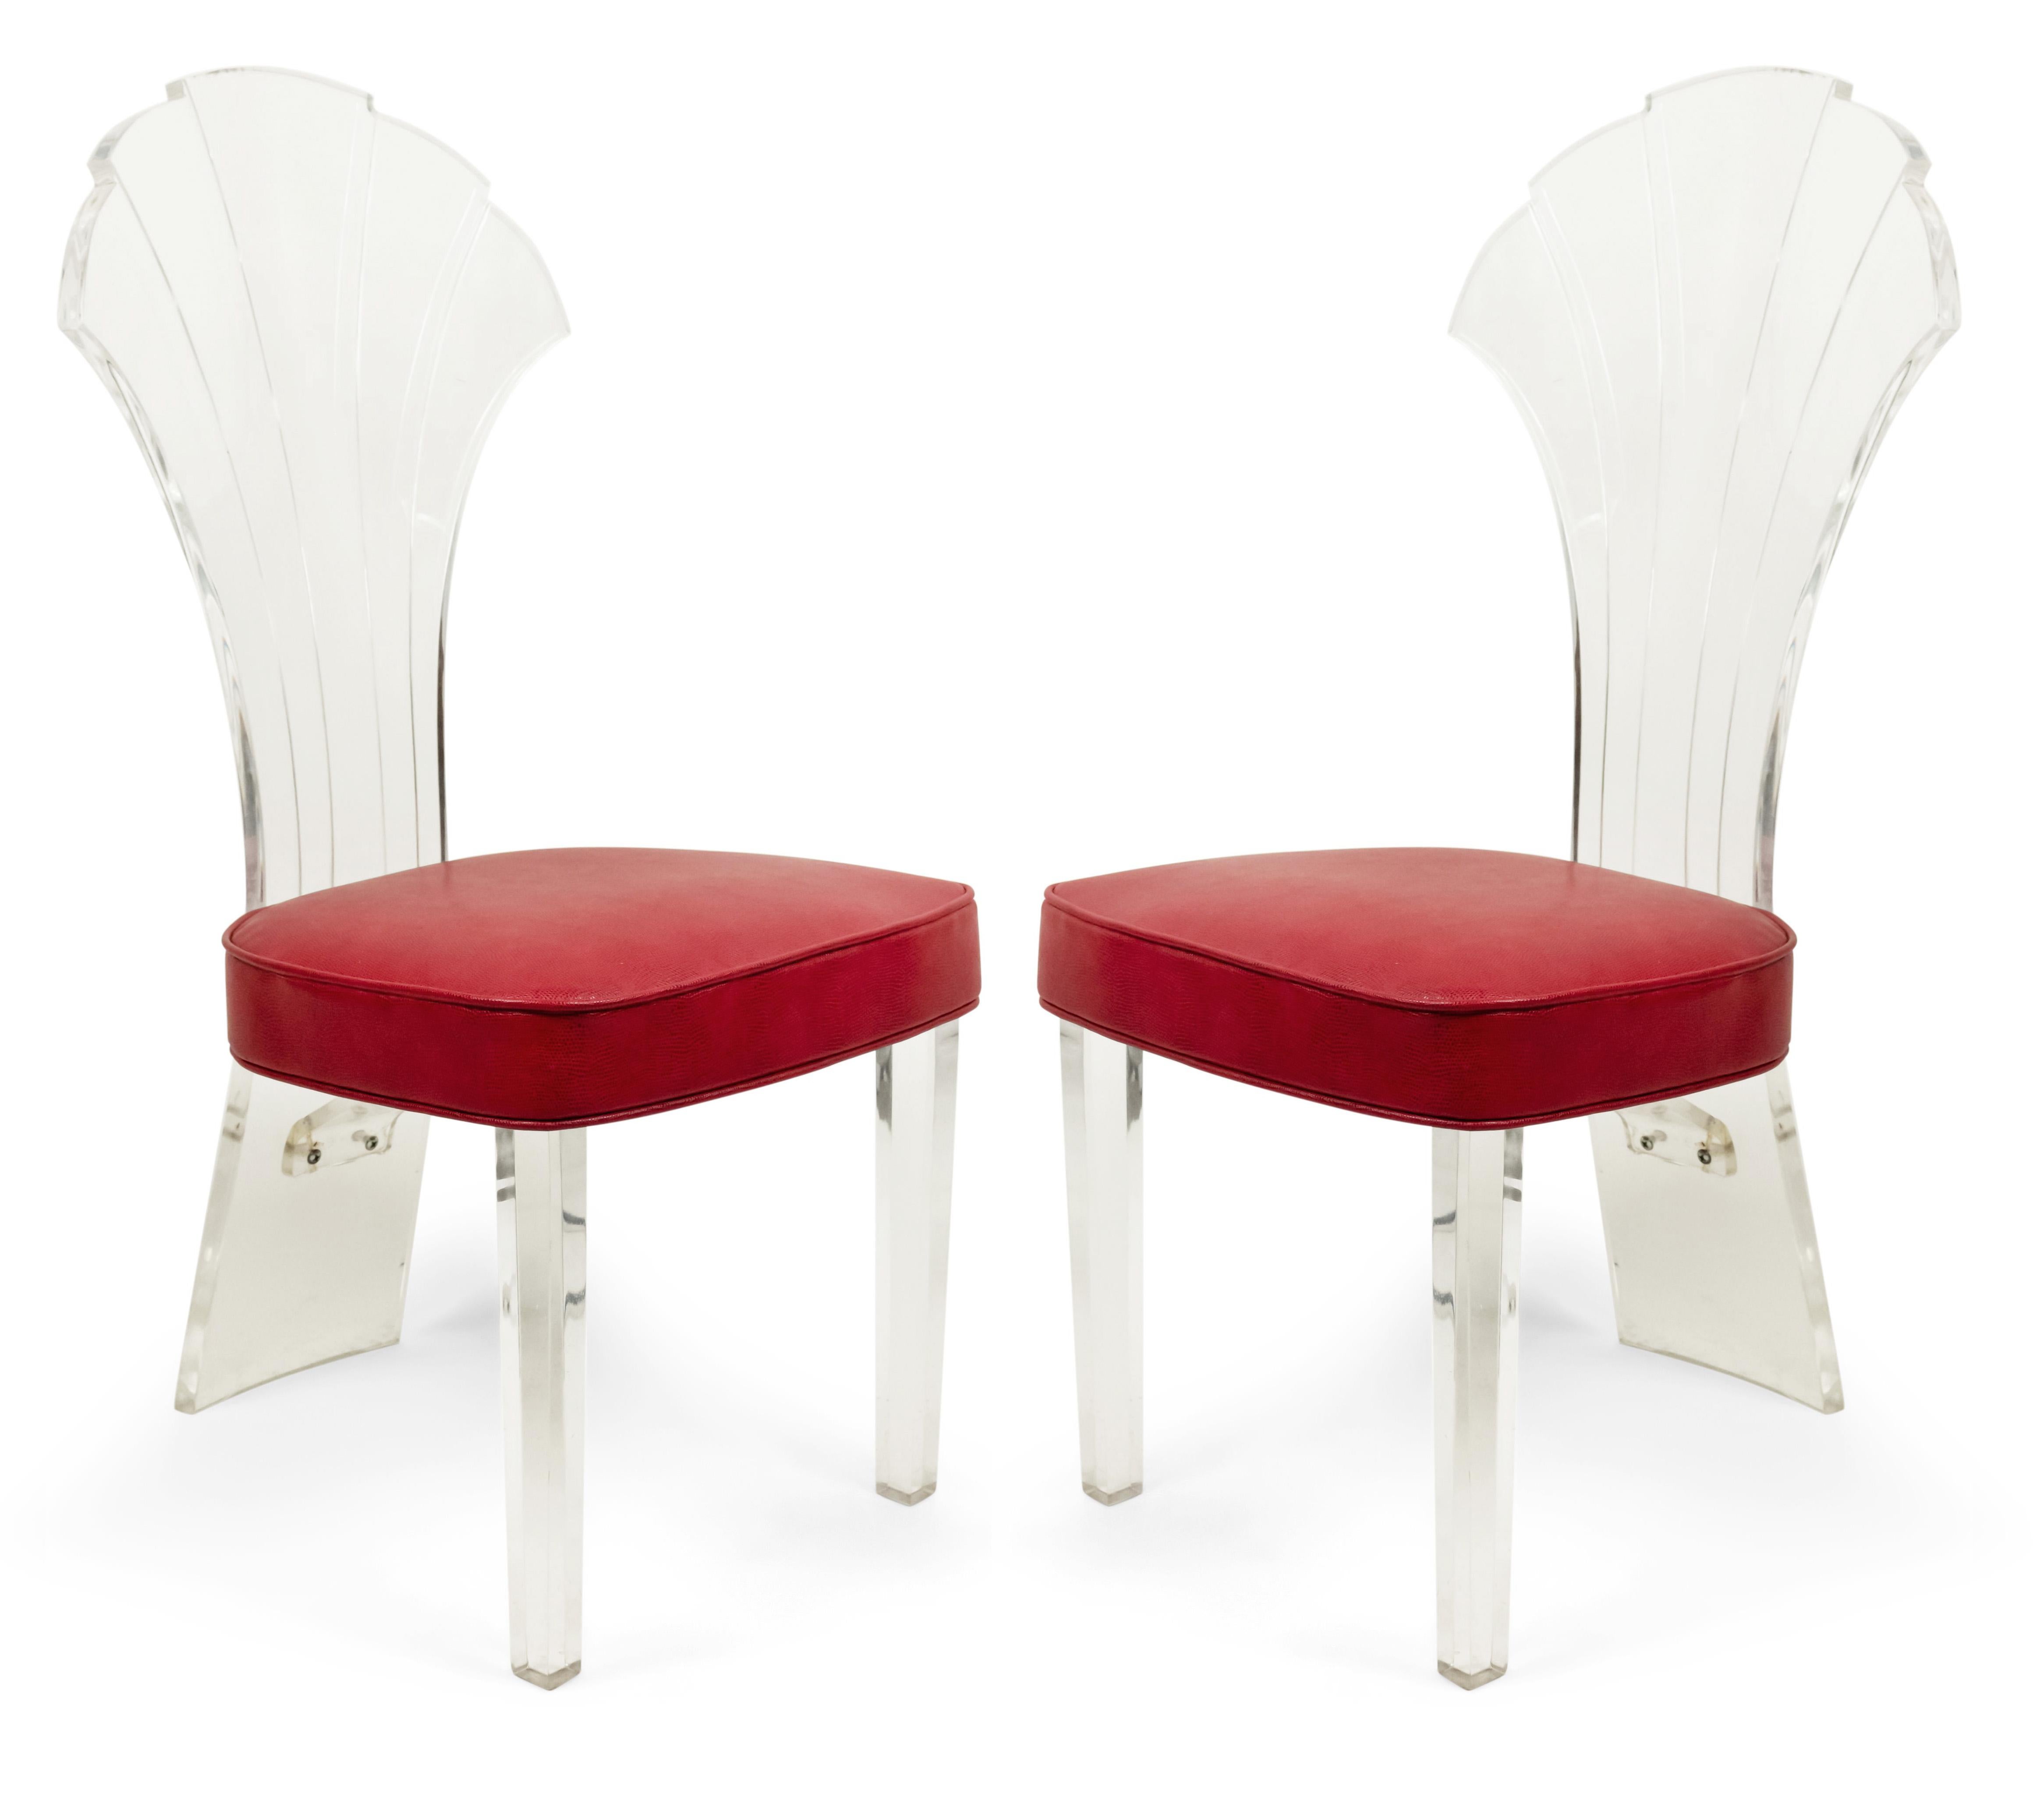 Set of 10 Mid-Century (1970s) Lucite frame side chairs with a fan back design and red faux snake skin seat (some distress to Lucite backs) (possibly Grosfeld House).
 